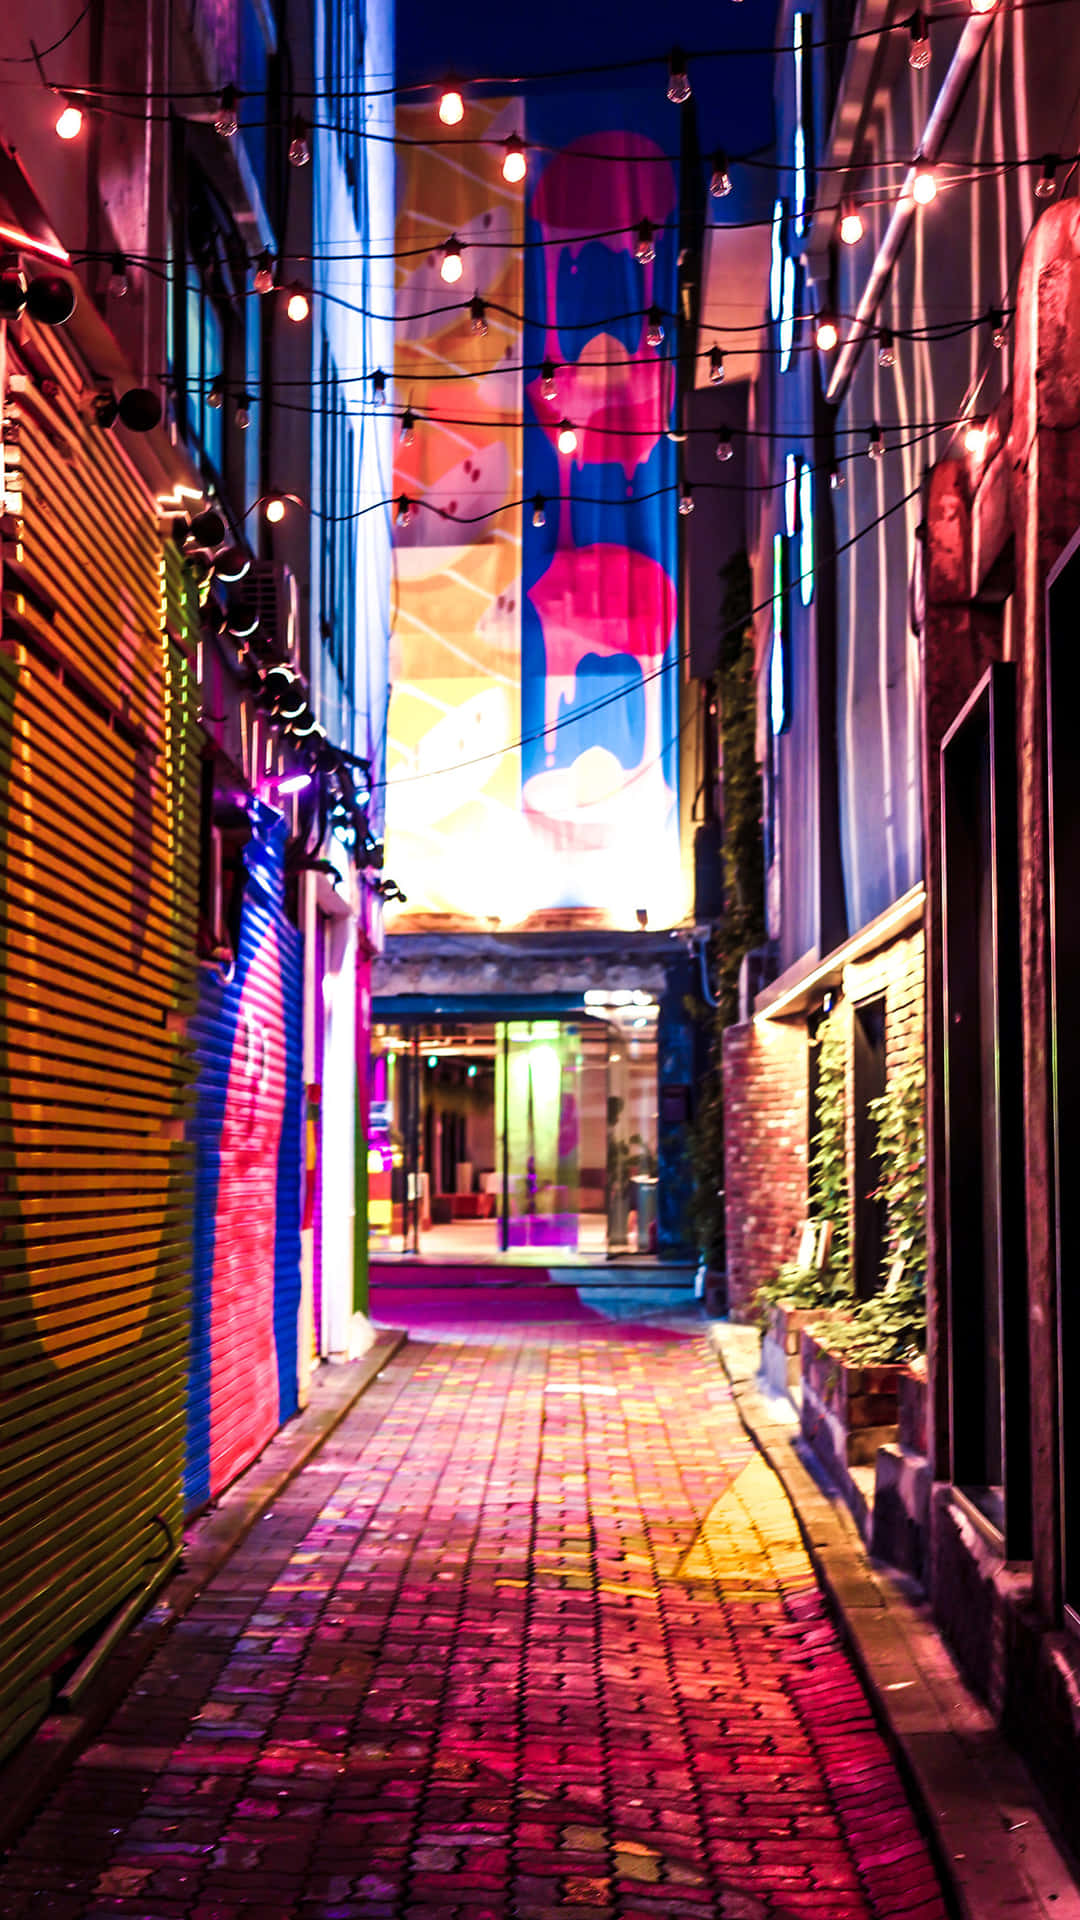 A Brick Walkway With Colorful Lights